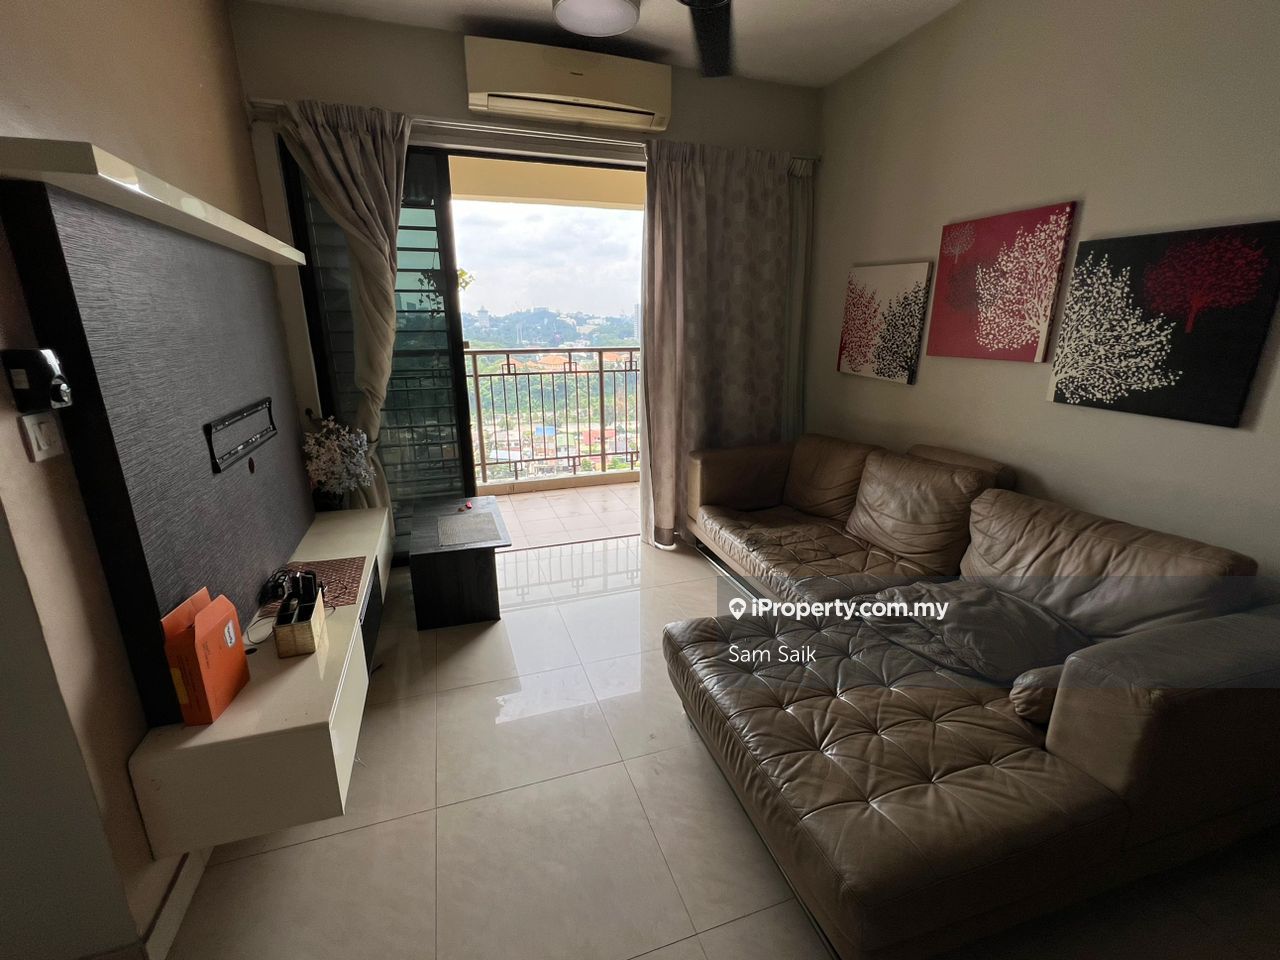 Rivercity jalan ipoh brand new condo for sale renovated well kept